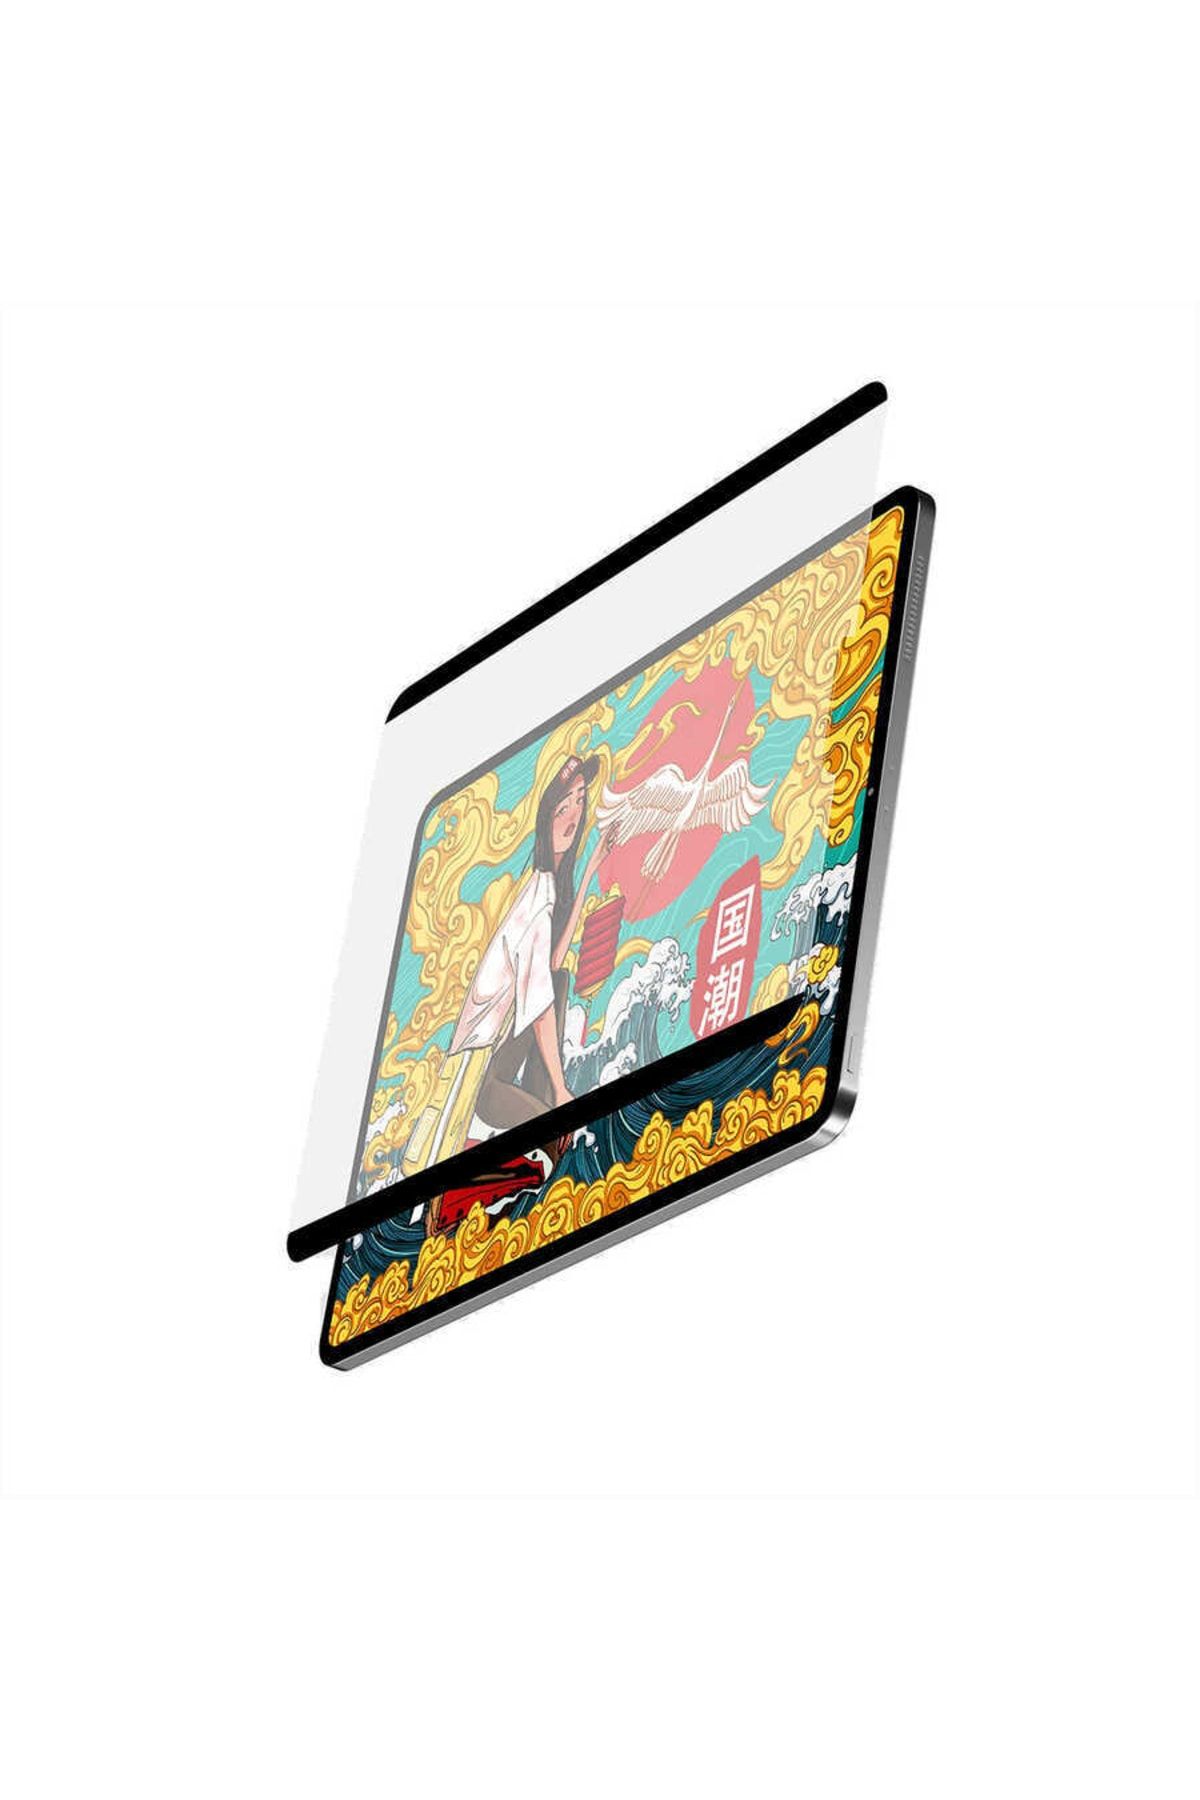 WiWU Privacy Screen Protector for iPad 10.2'' 10.5''11'' 12.9 inch  Paper-feel Magnetic Attach Screen Film for iPad